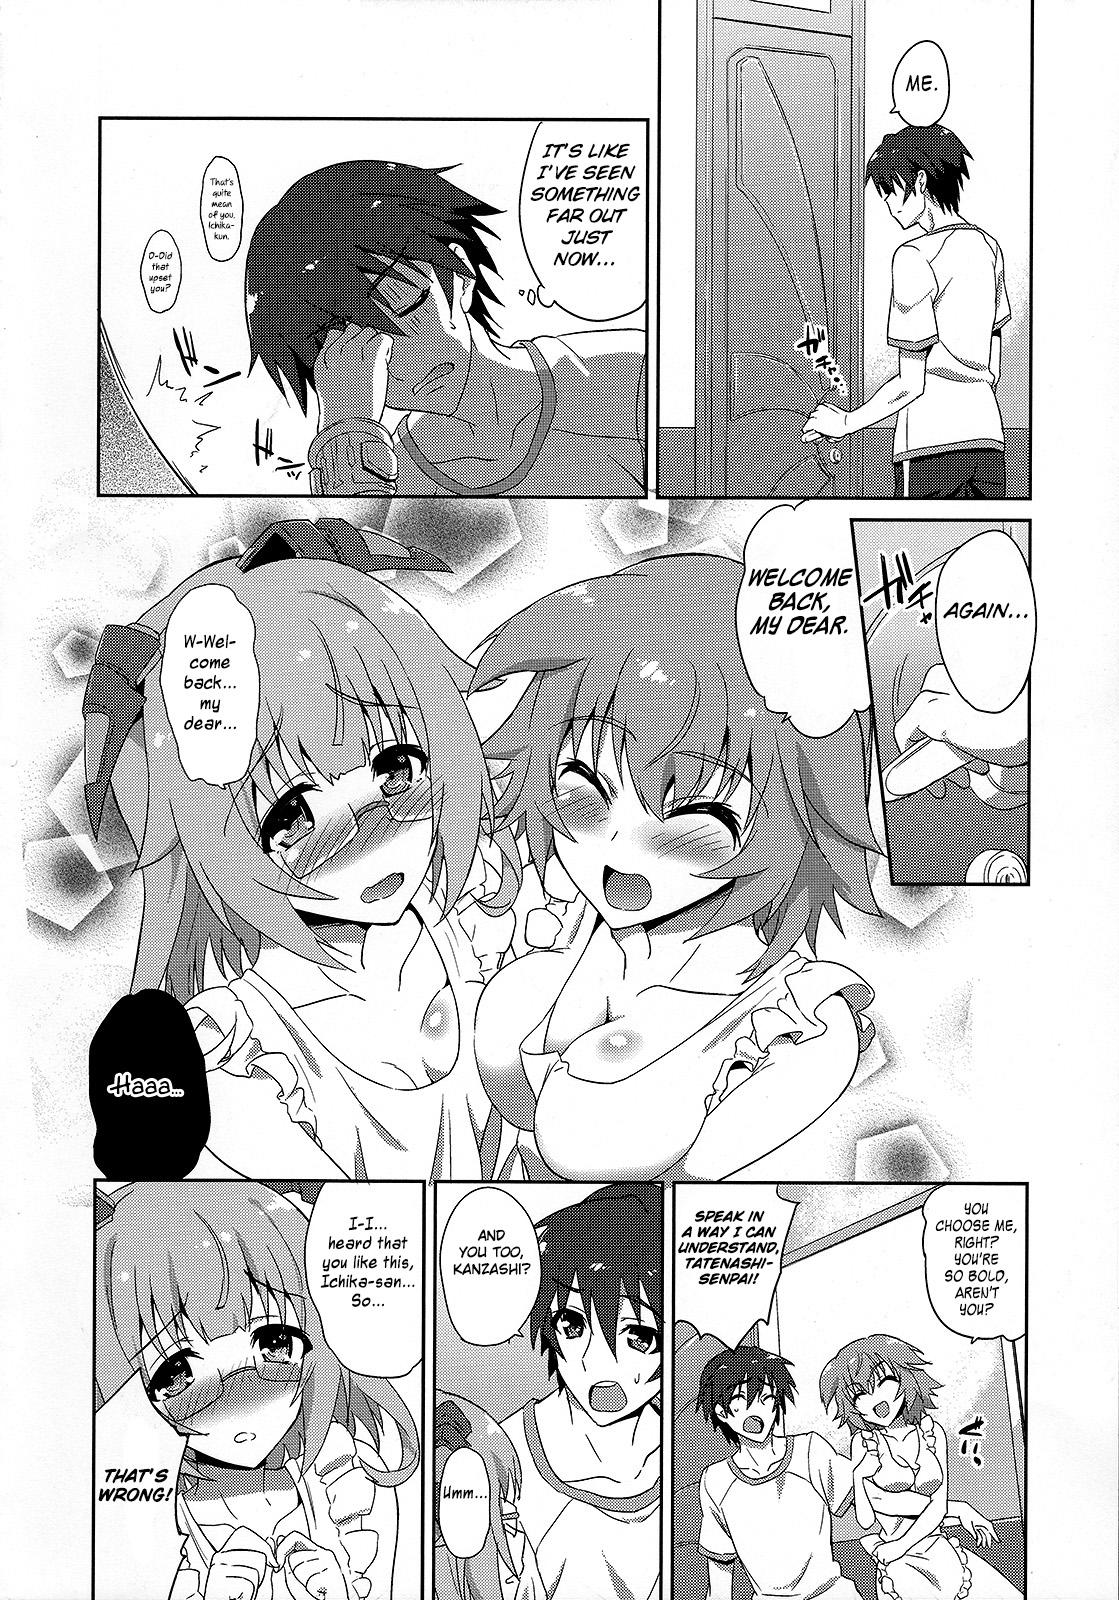 Flogging IS ICHIKA LOVE SISTERS!! - Infinite stratos Glamour - Page 3